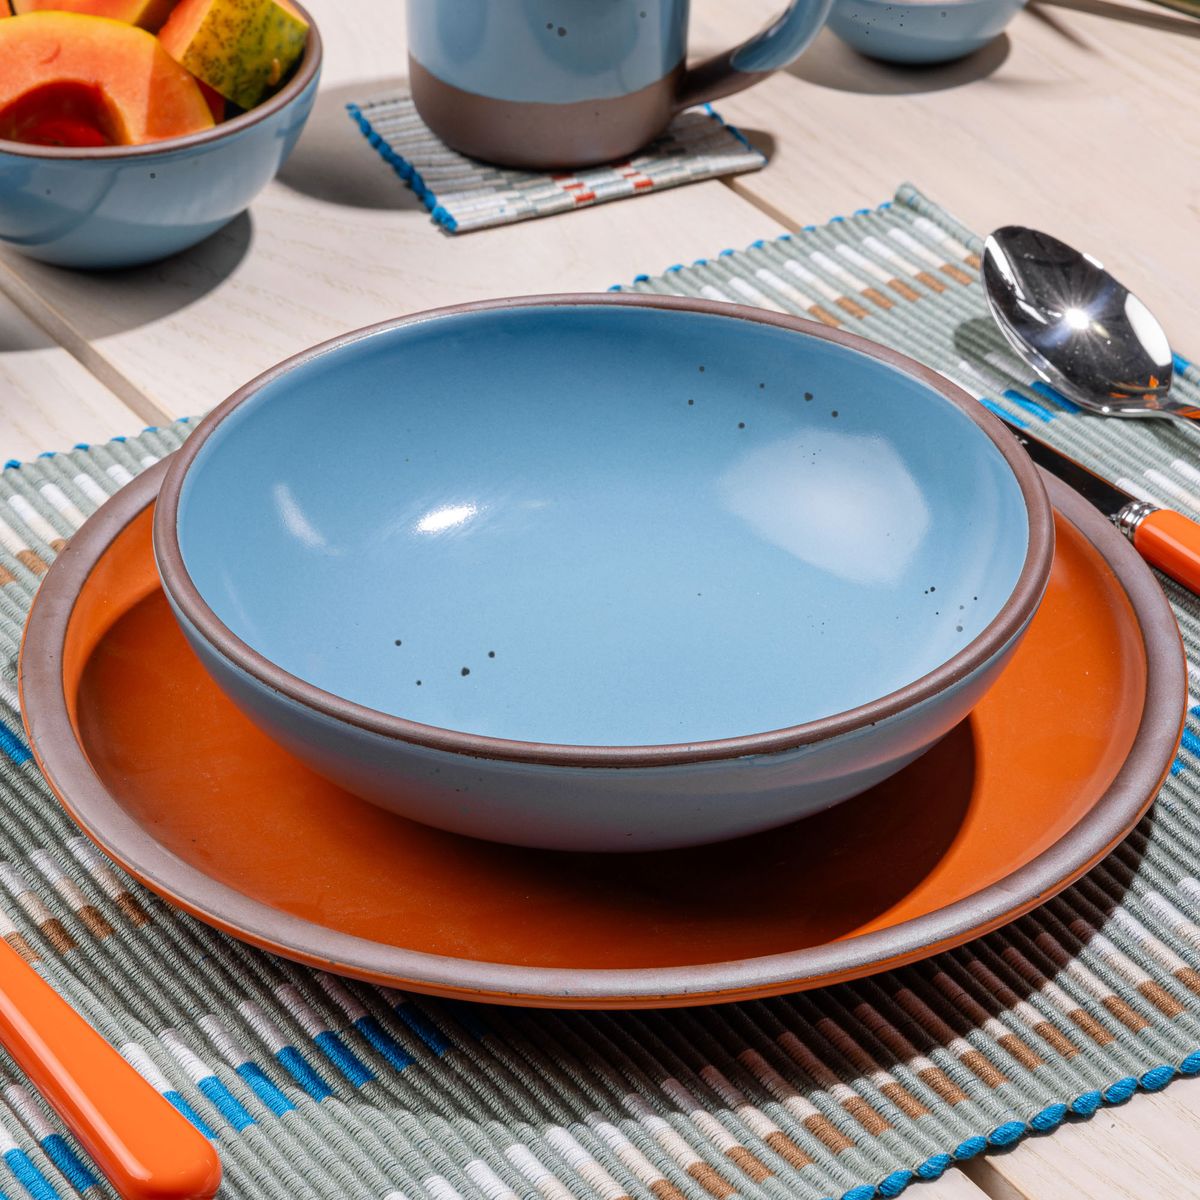 A shallow dinner bowl in a robin's egg blue color sits on a large dinner plate in a bold orange color.